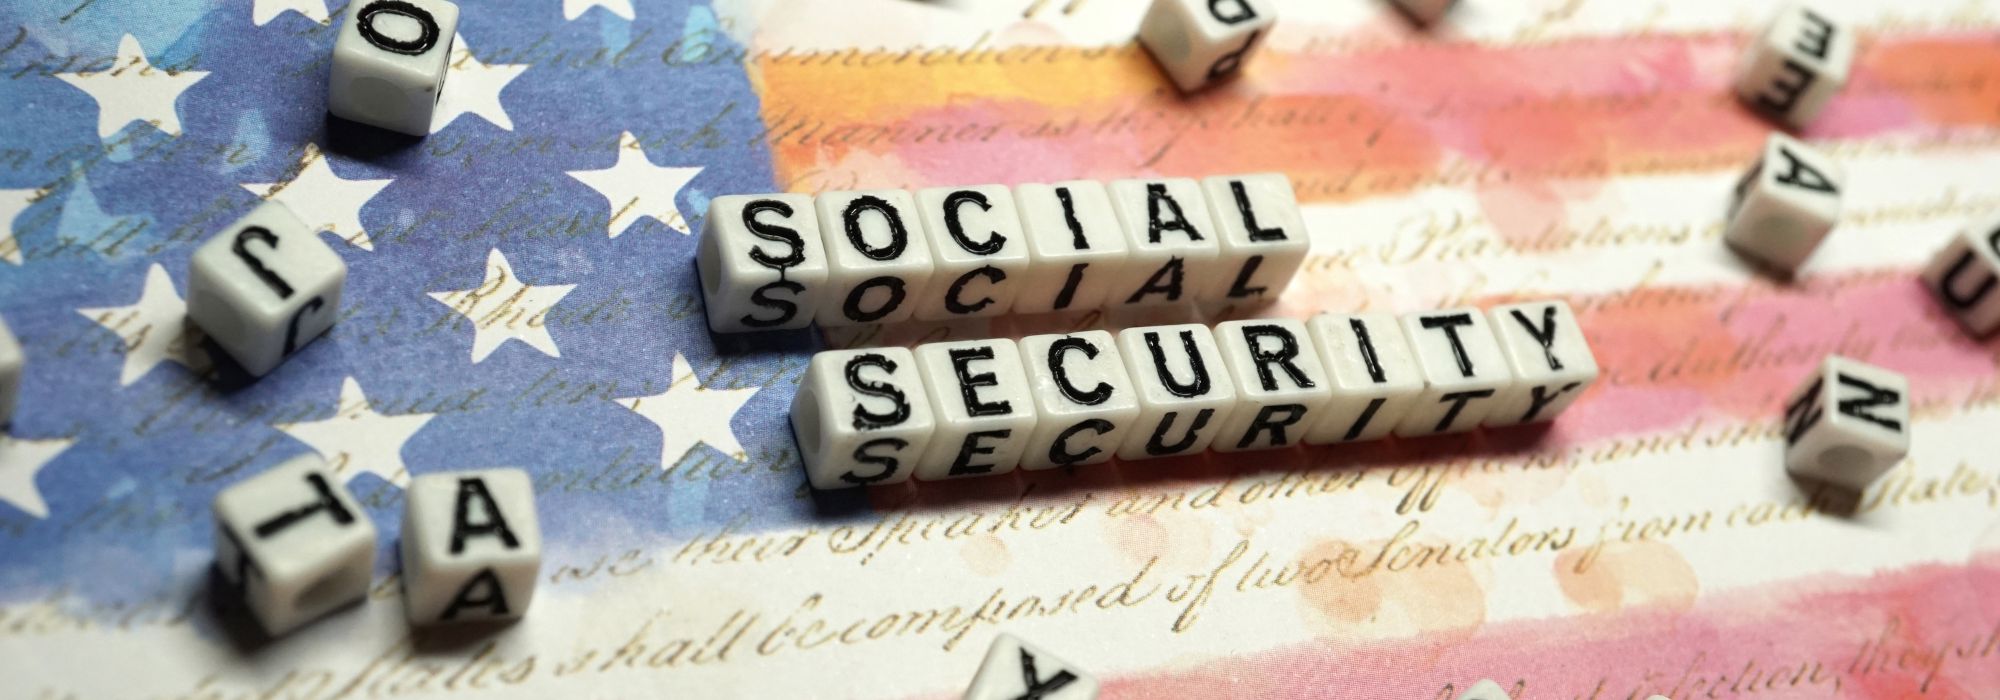 Social Security Disability Services